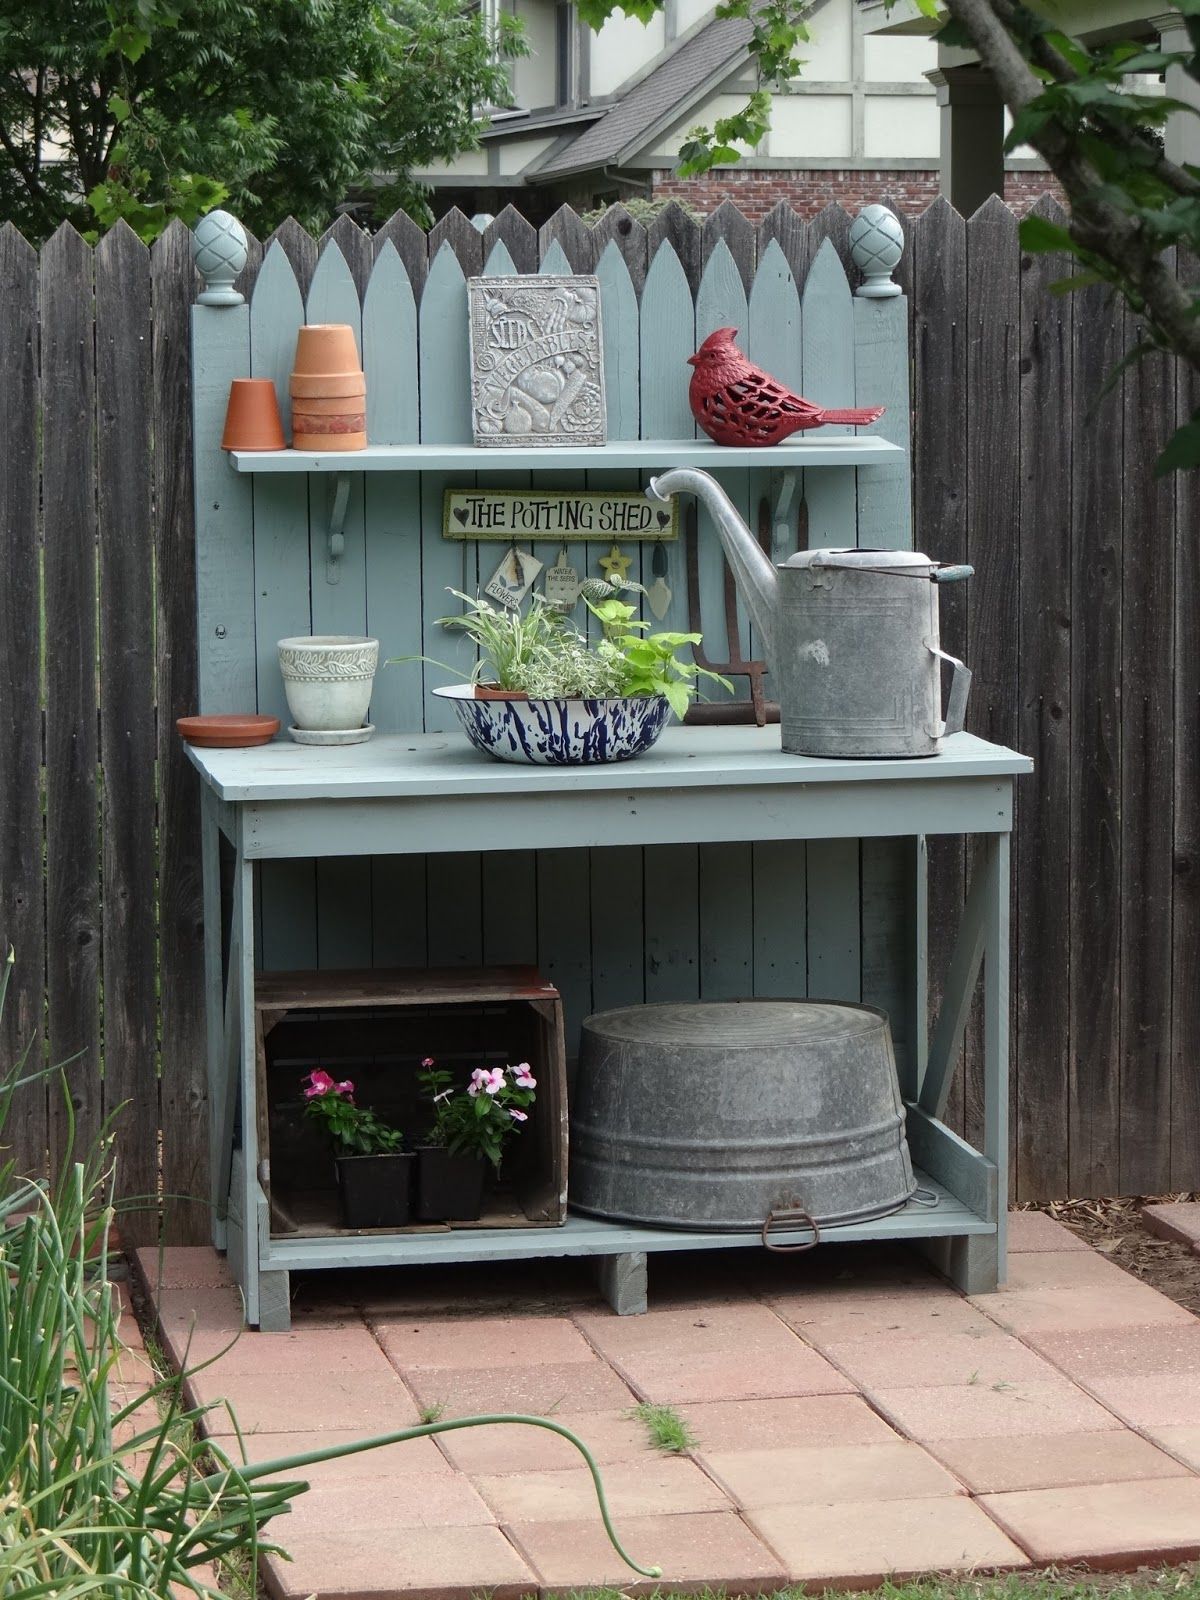 ... realistic suburban garden, I spied this potting bench, painted just the right shade of blue to offset the terracotta accents and galvanized what-nots. -   24 zen garden bench
 ideas